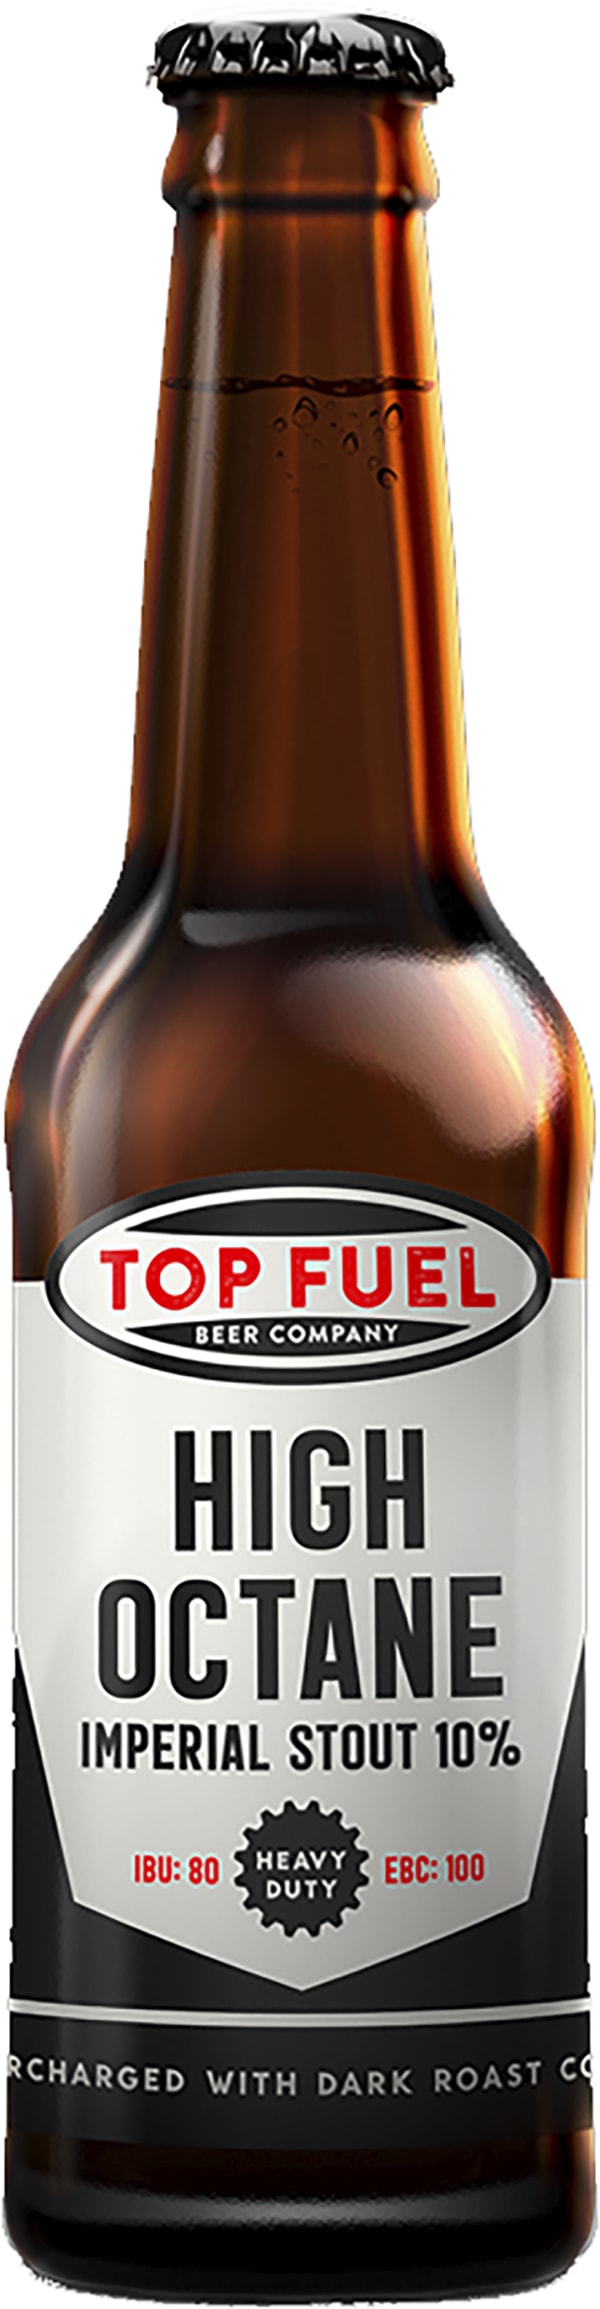 Top Fuel High Octane Imperial Stout